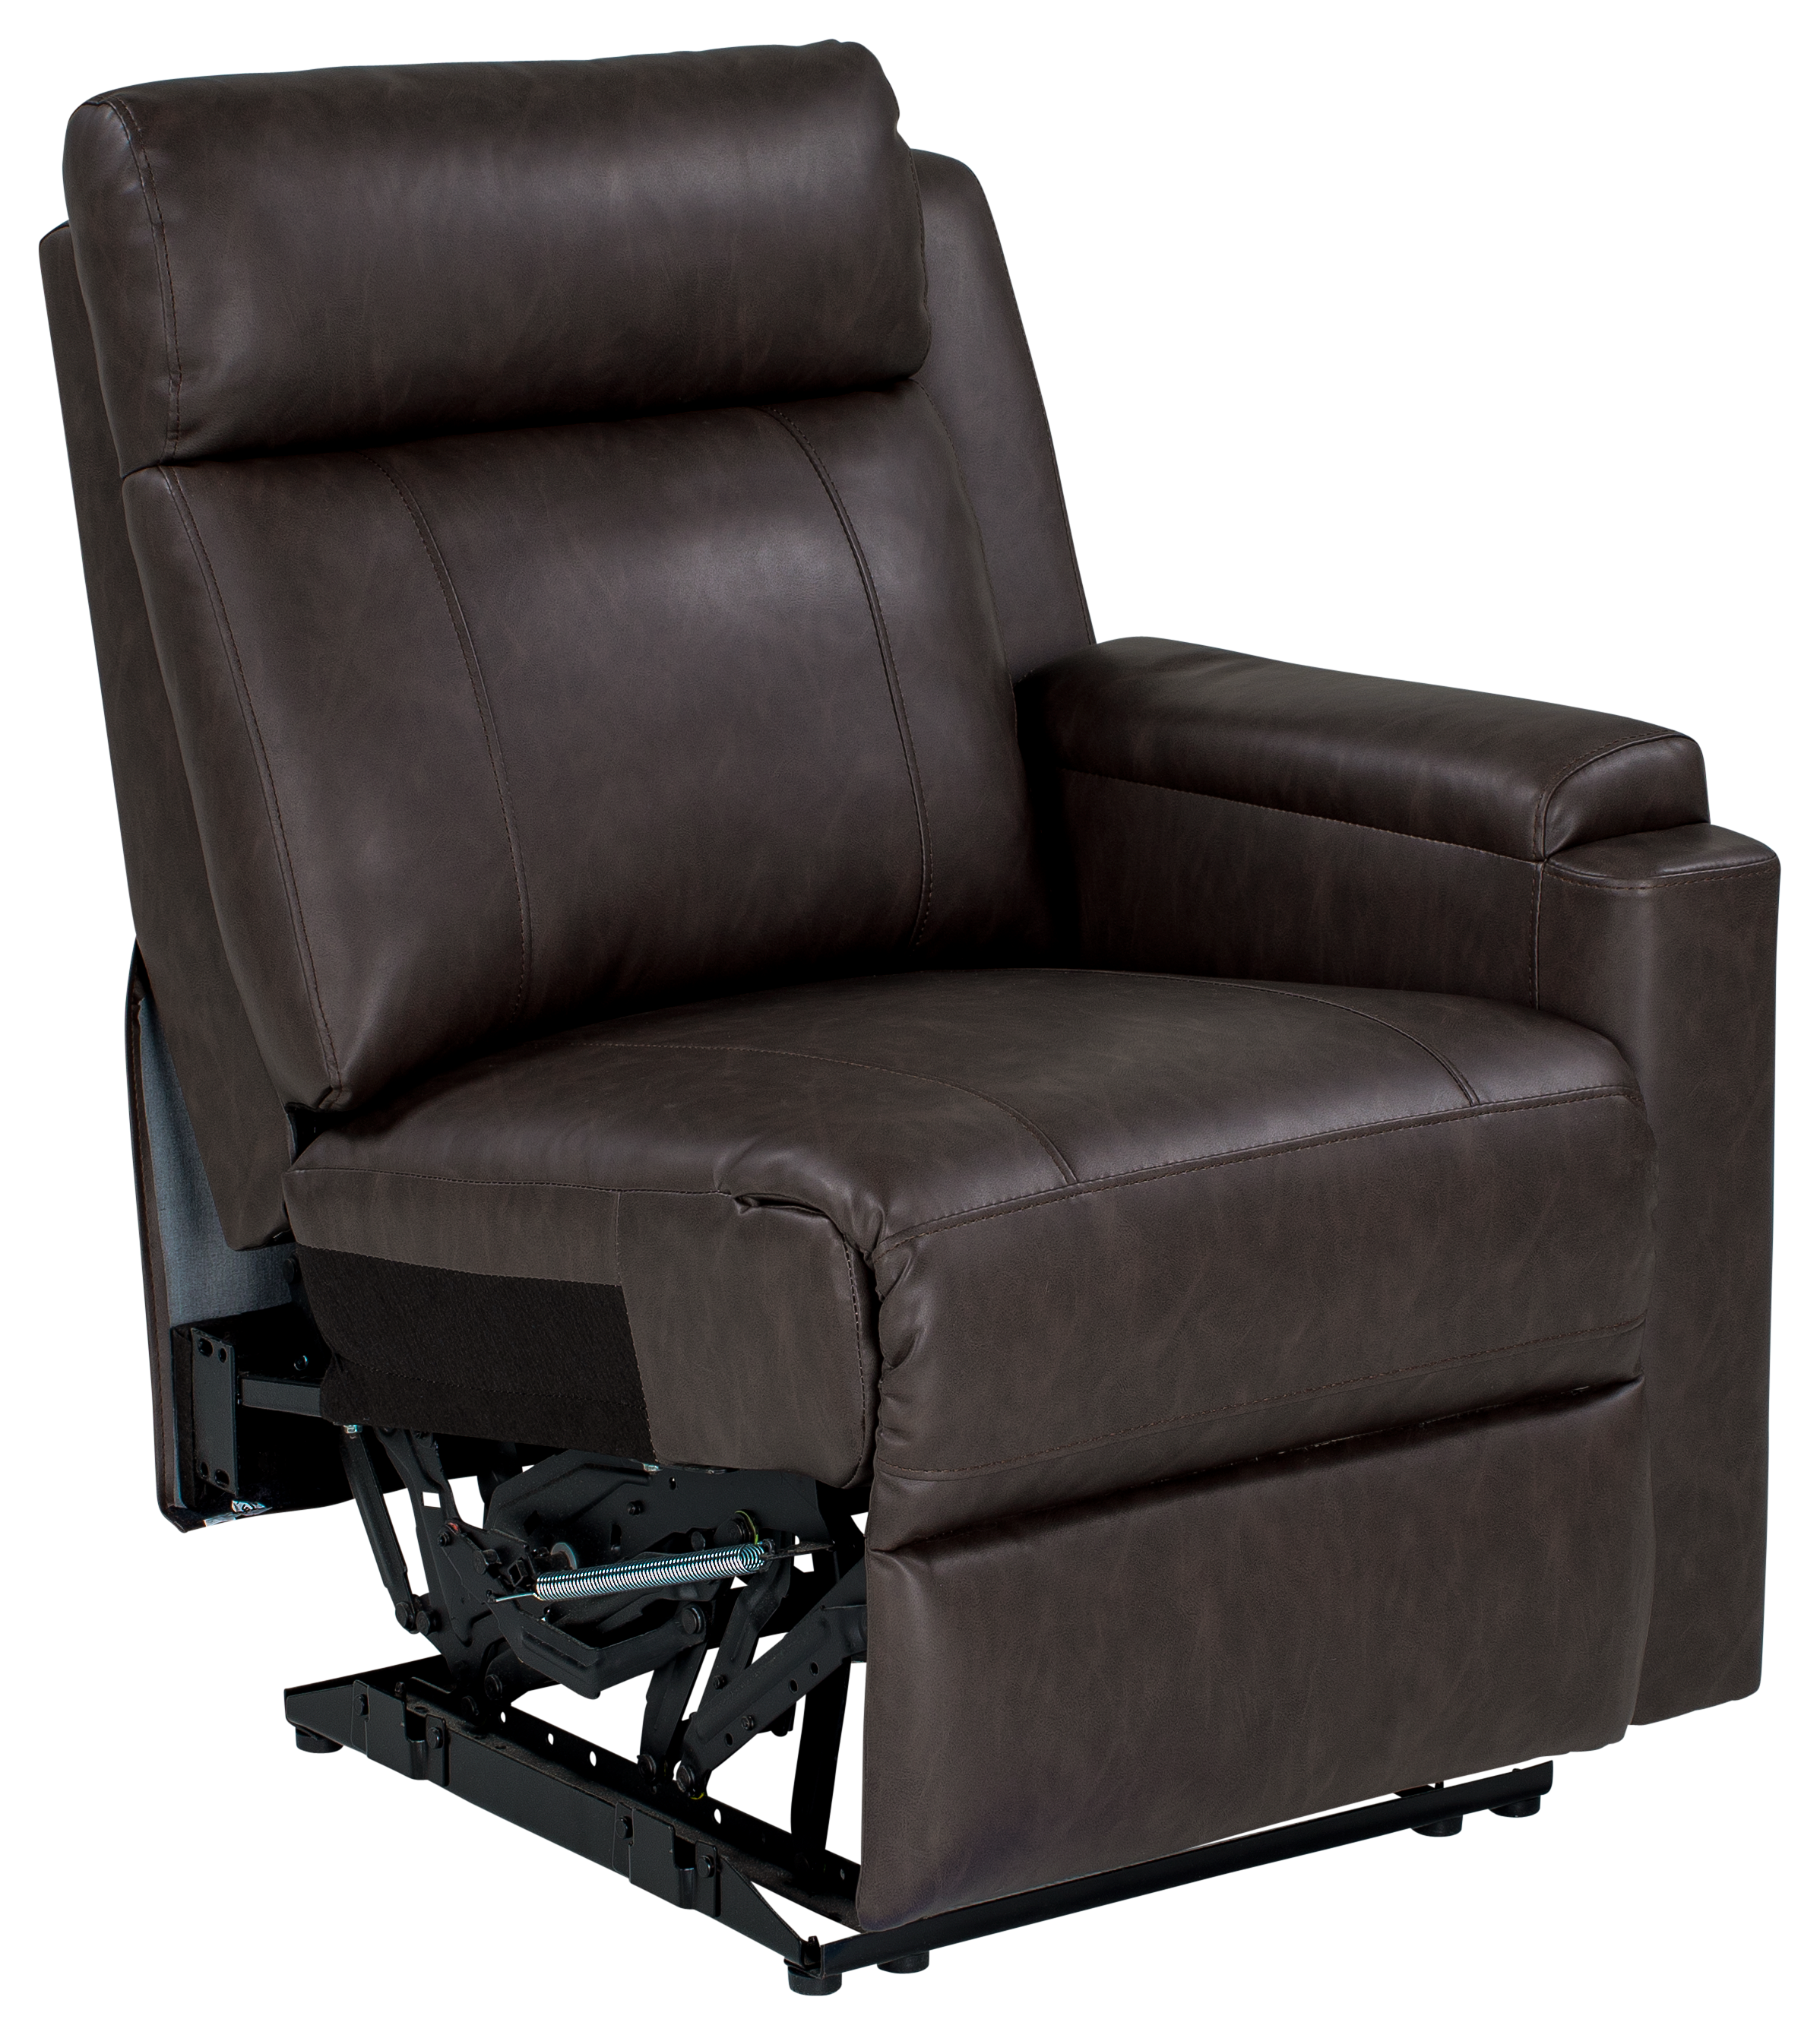 Thomas Payne Millbrae RV Furniture Collection Heritage Series Single-Arm Recliners